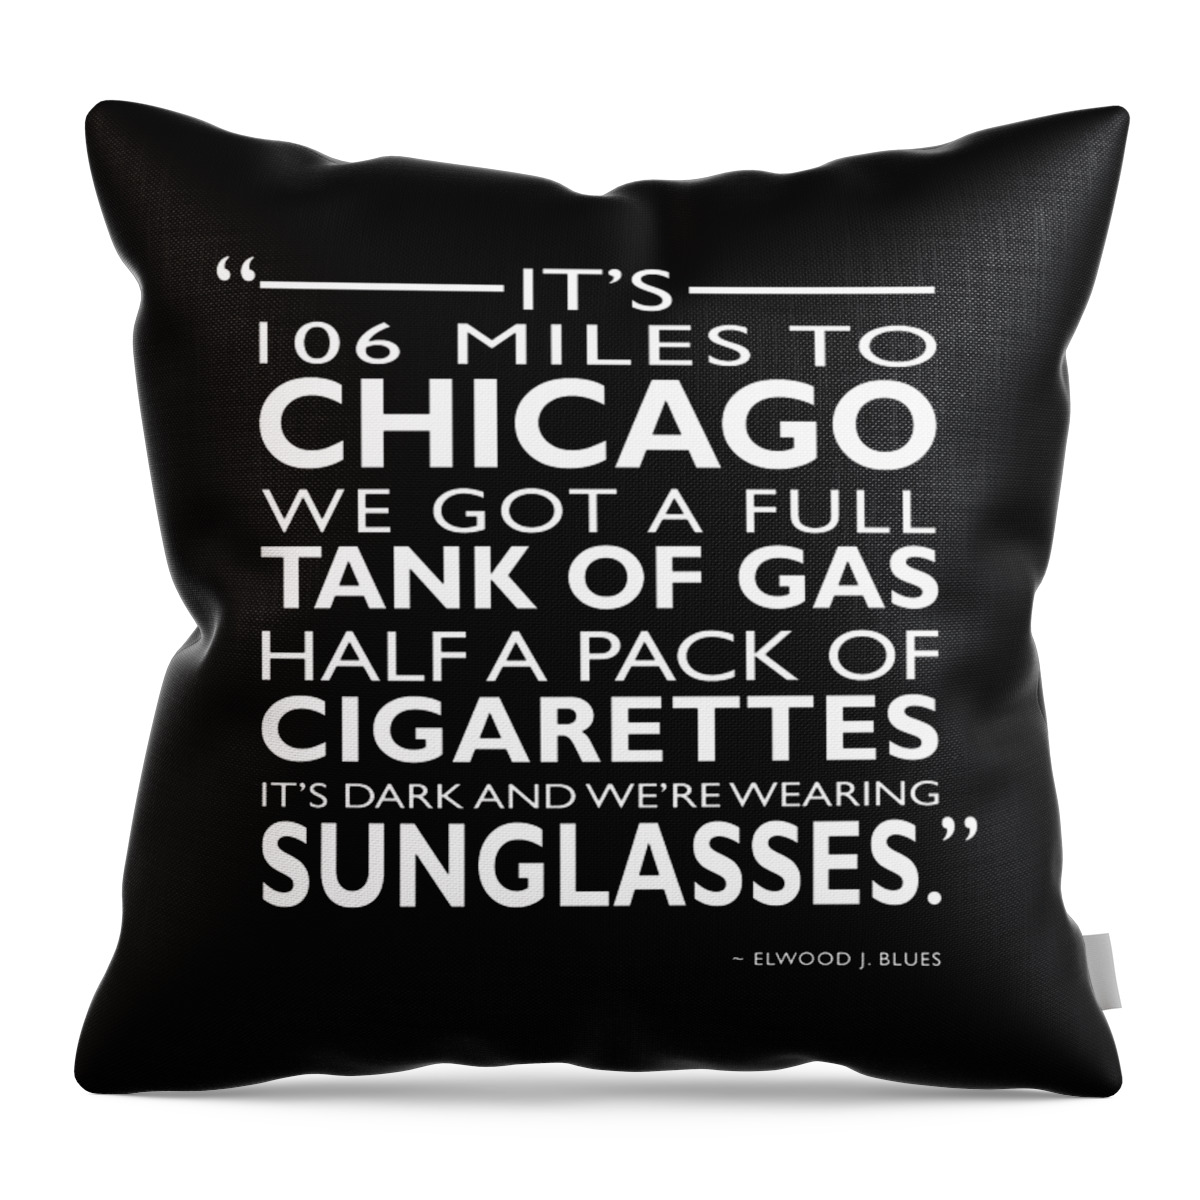 Rock And Roll Throw Pillow featuring the photograph Its 106 Miles To Chicago by Mark Rogan